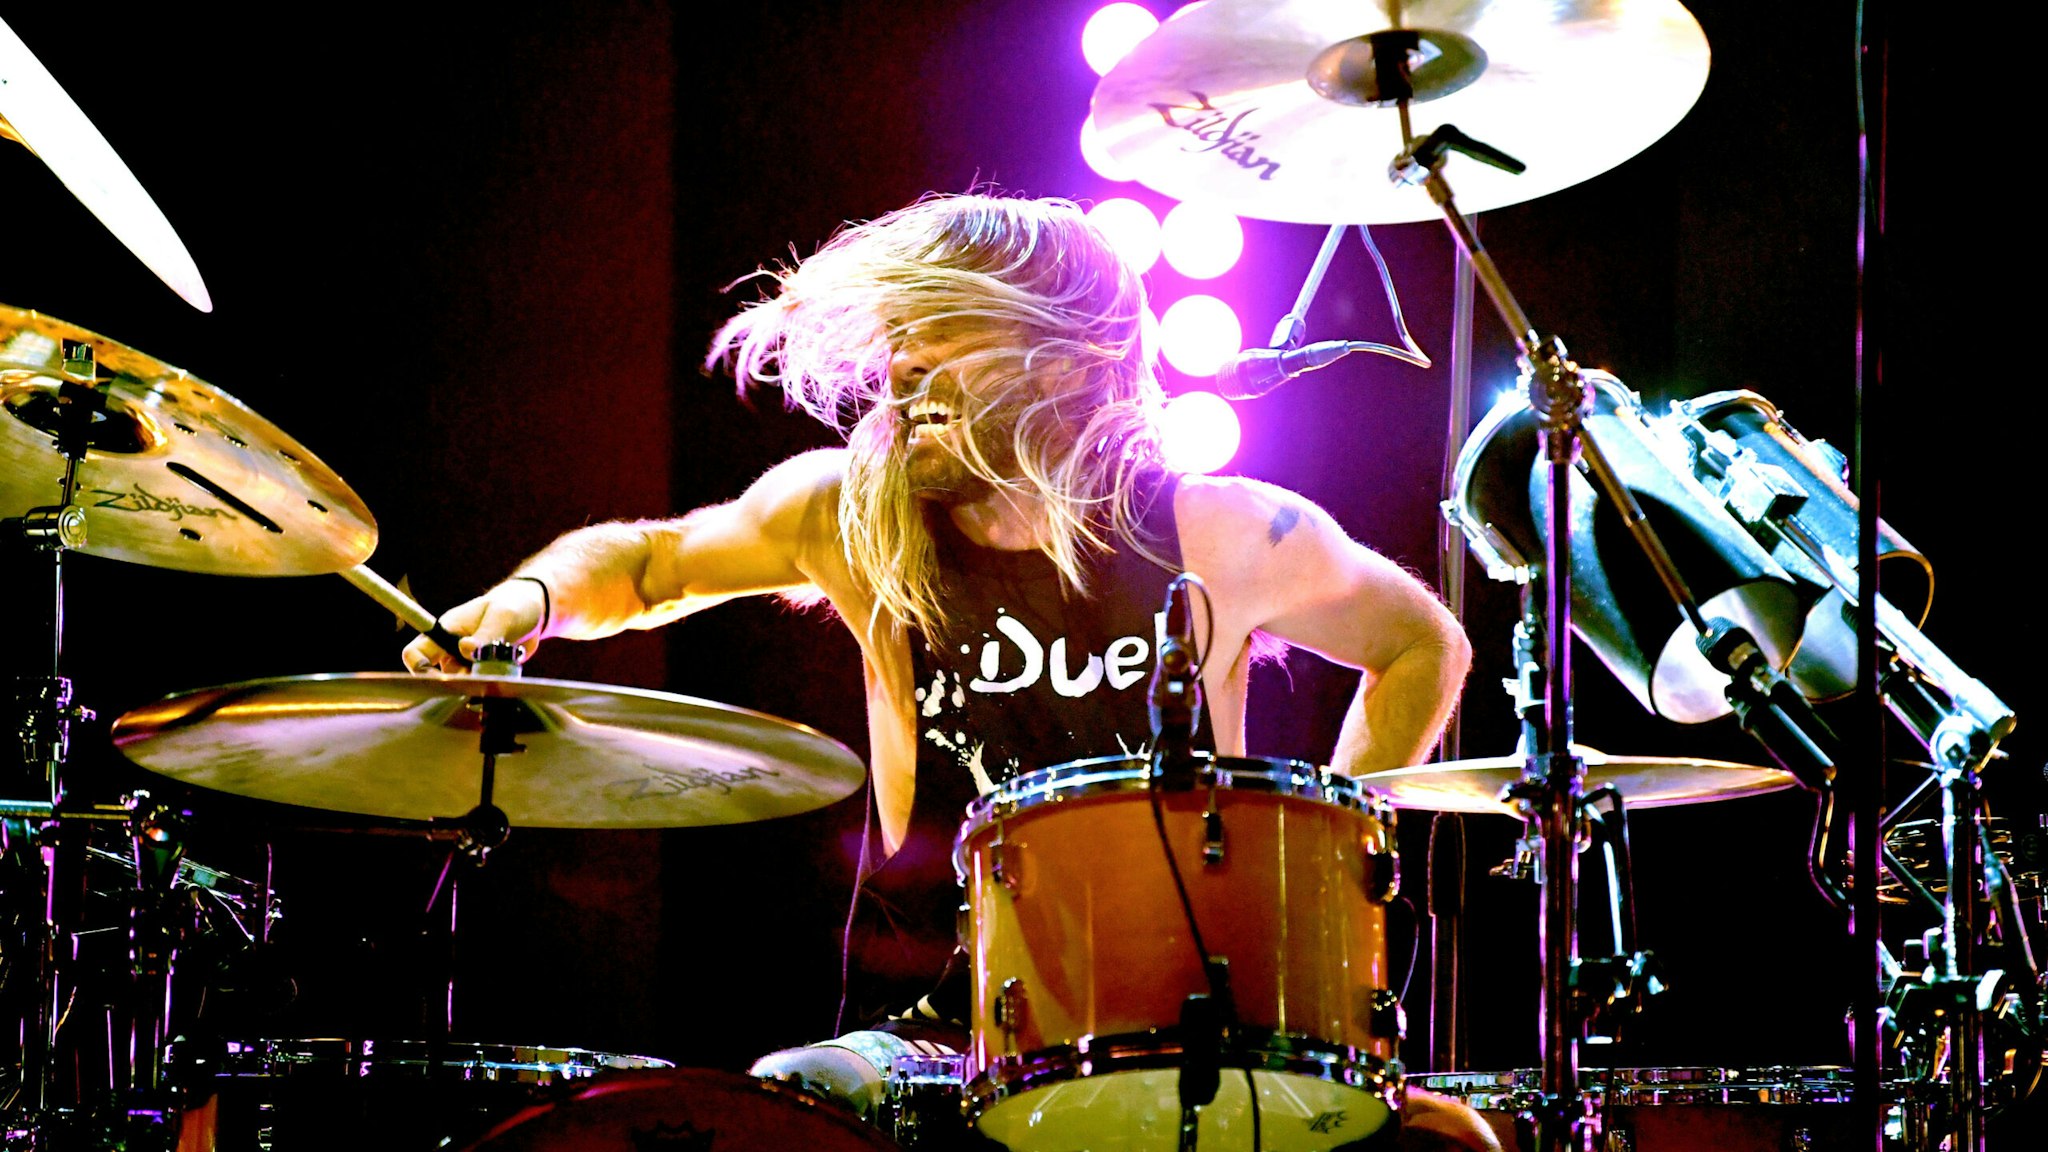 BURBANK, CALIFORNIA - UNSPECIFIED: (EDITORIAL USE ONLY) In this image released on January 28, Taylor Hawkins of Foo Fighters performs onstage during the 2021 iHeartRadio ALTer EGO Presented by Capital One stream on LiveXLive.com and broadcast on iHeartRadio’s Alternative and Rock stations nationwide on January 28, 2021.